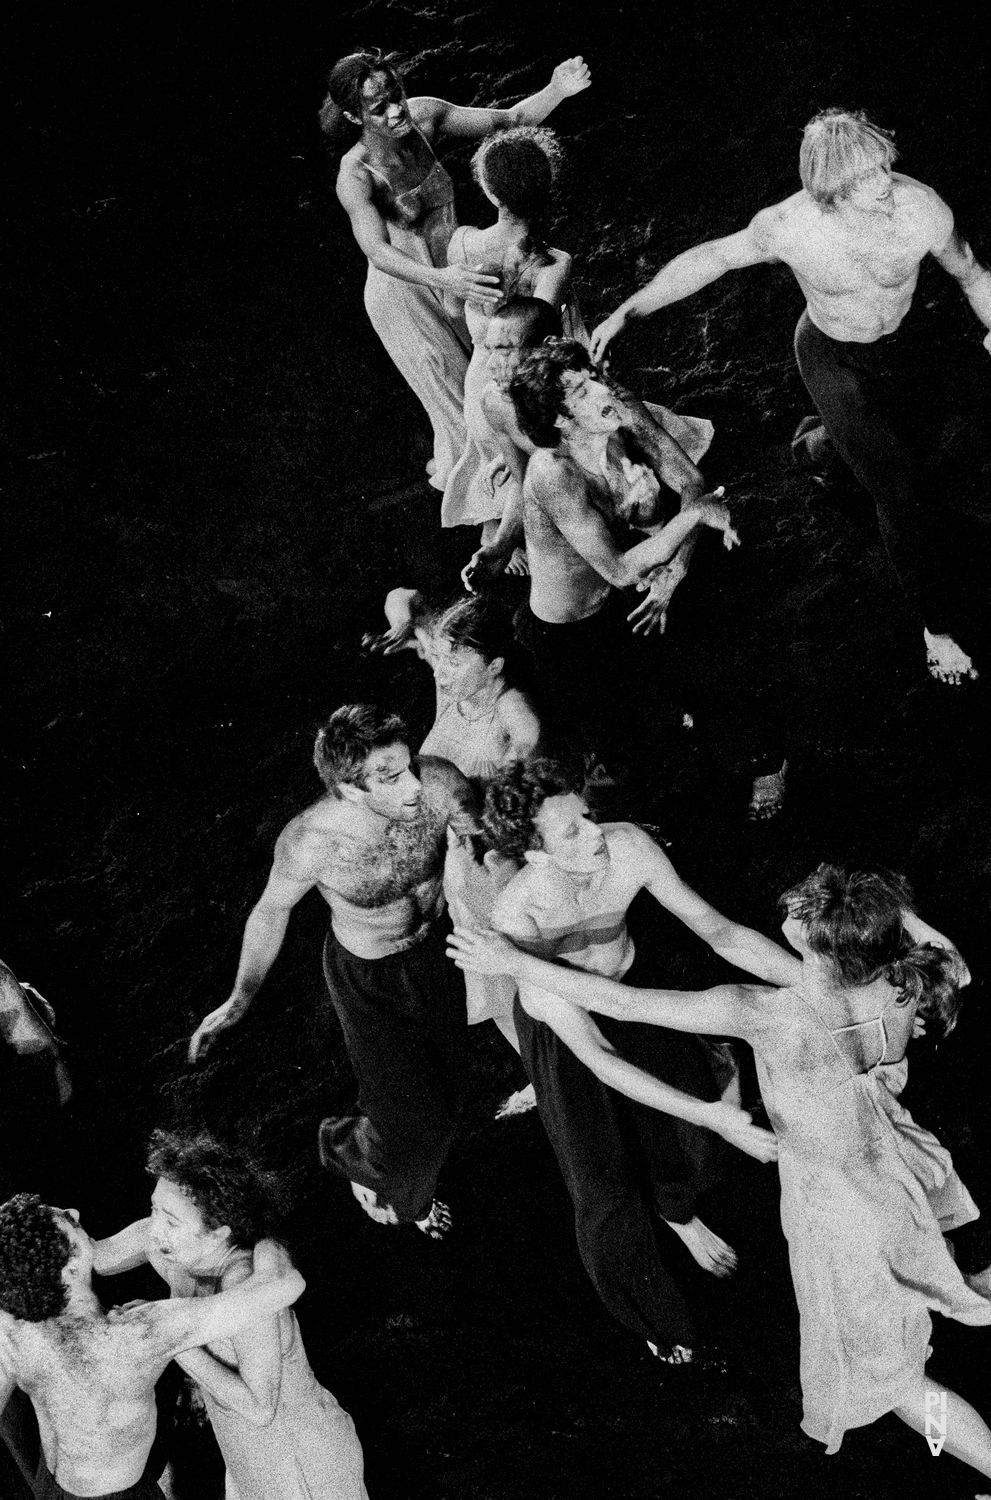 “The Rite of Spring” by Pina Bausch